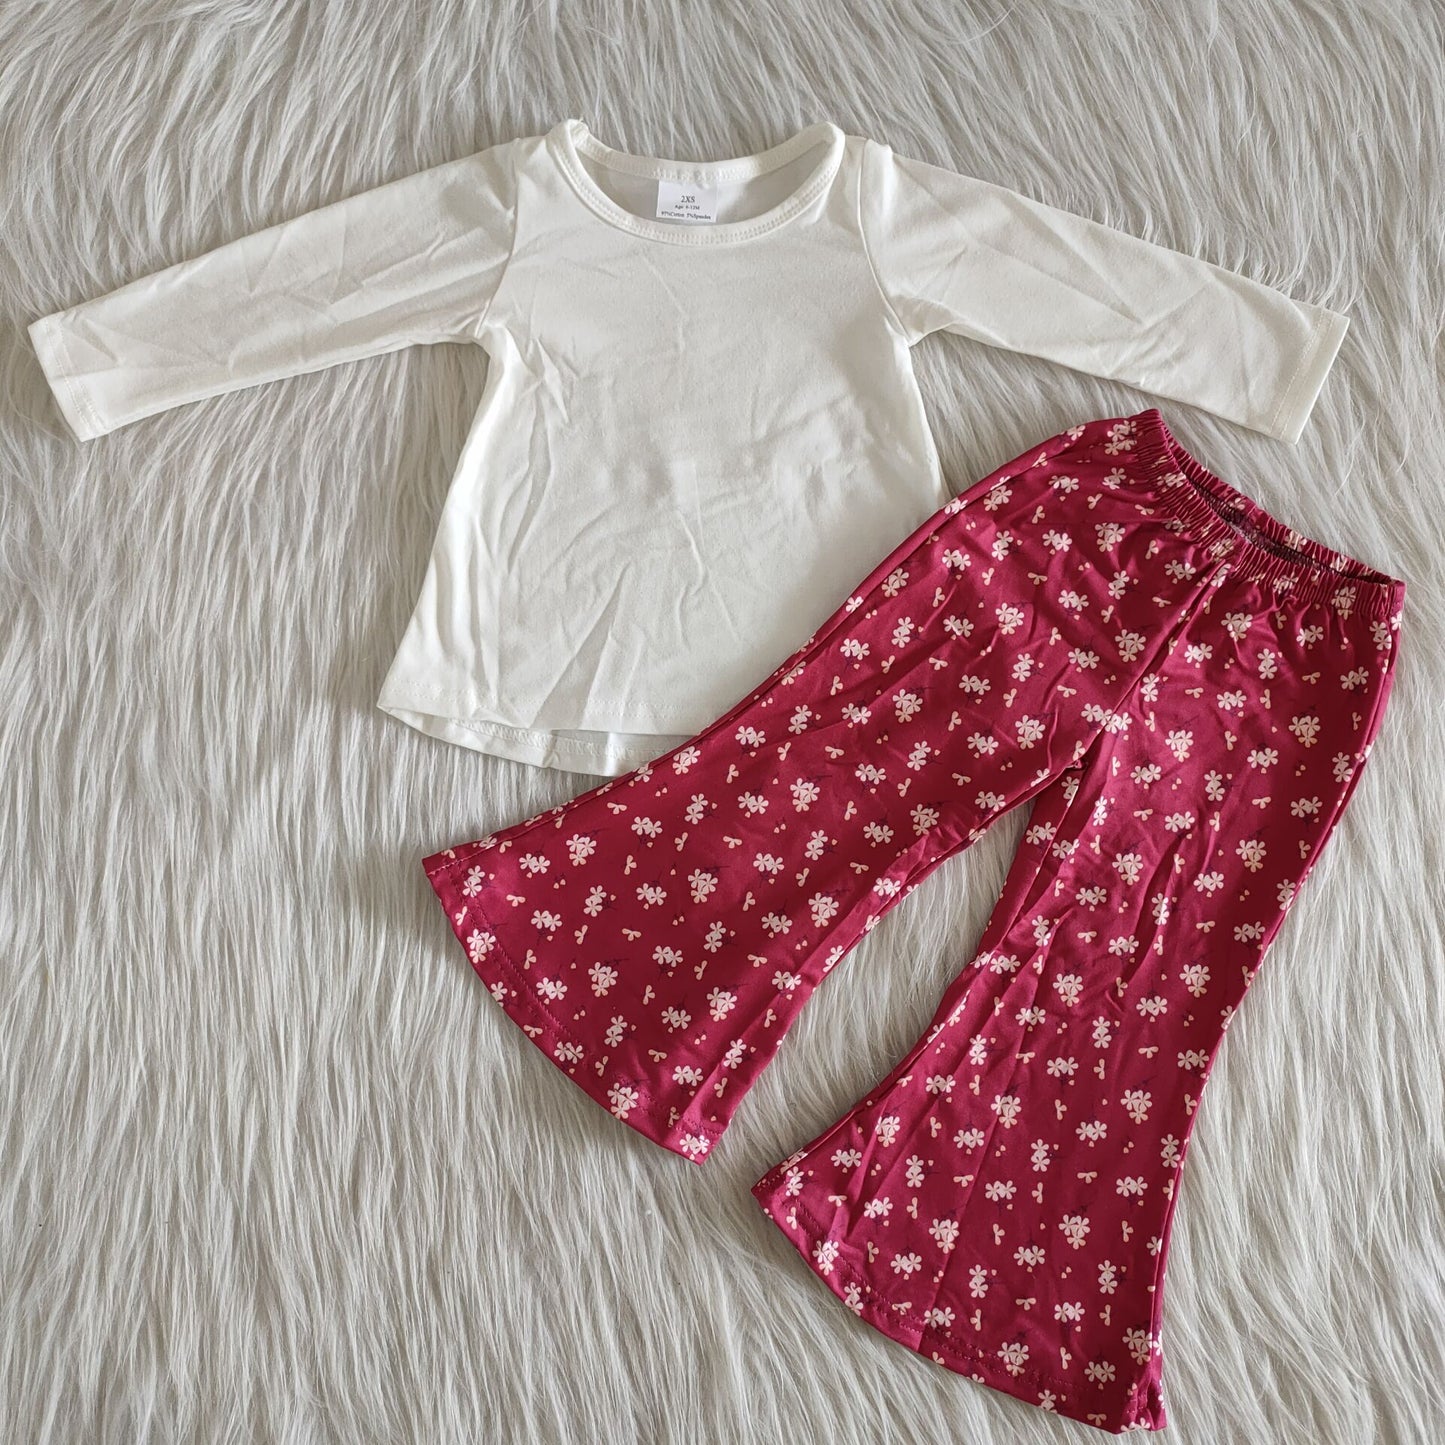 white top red flowers design long sleeve pants set